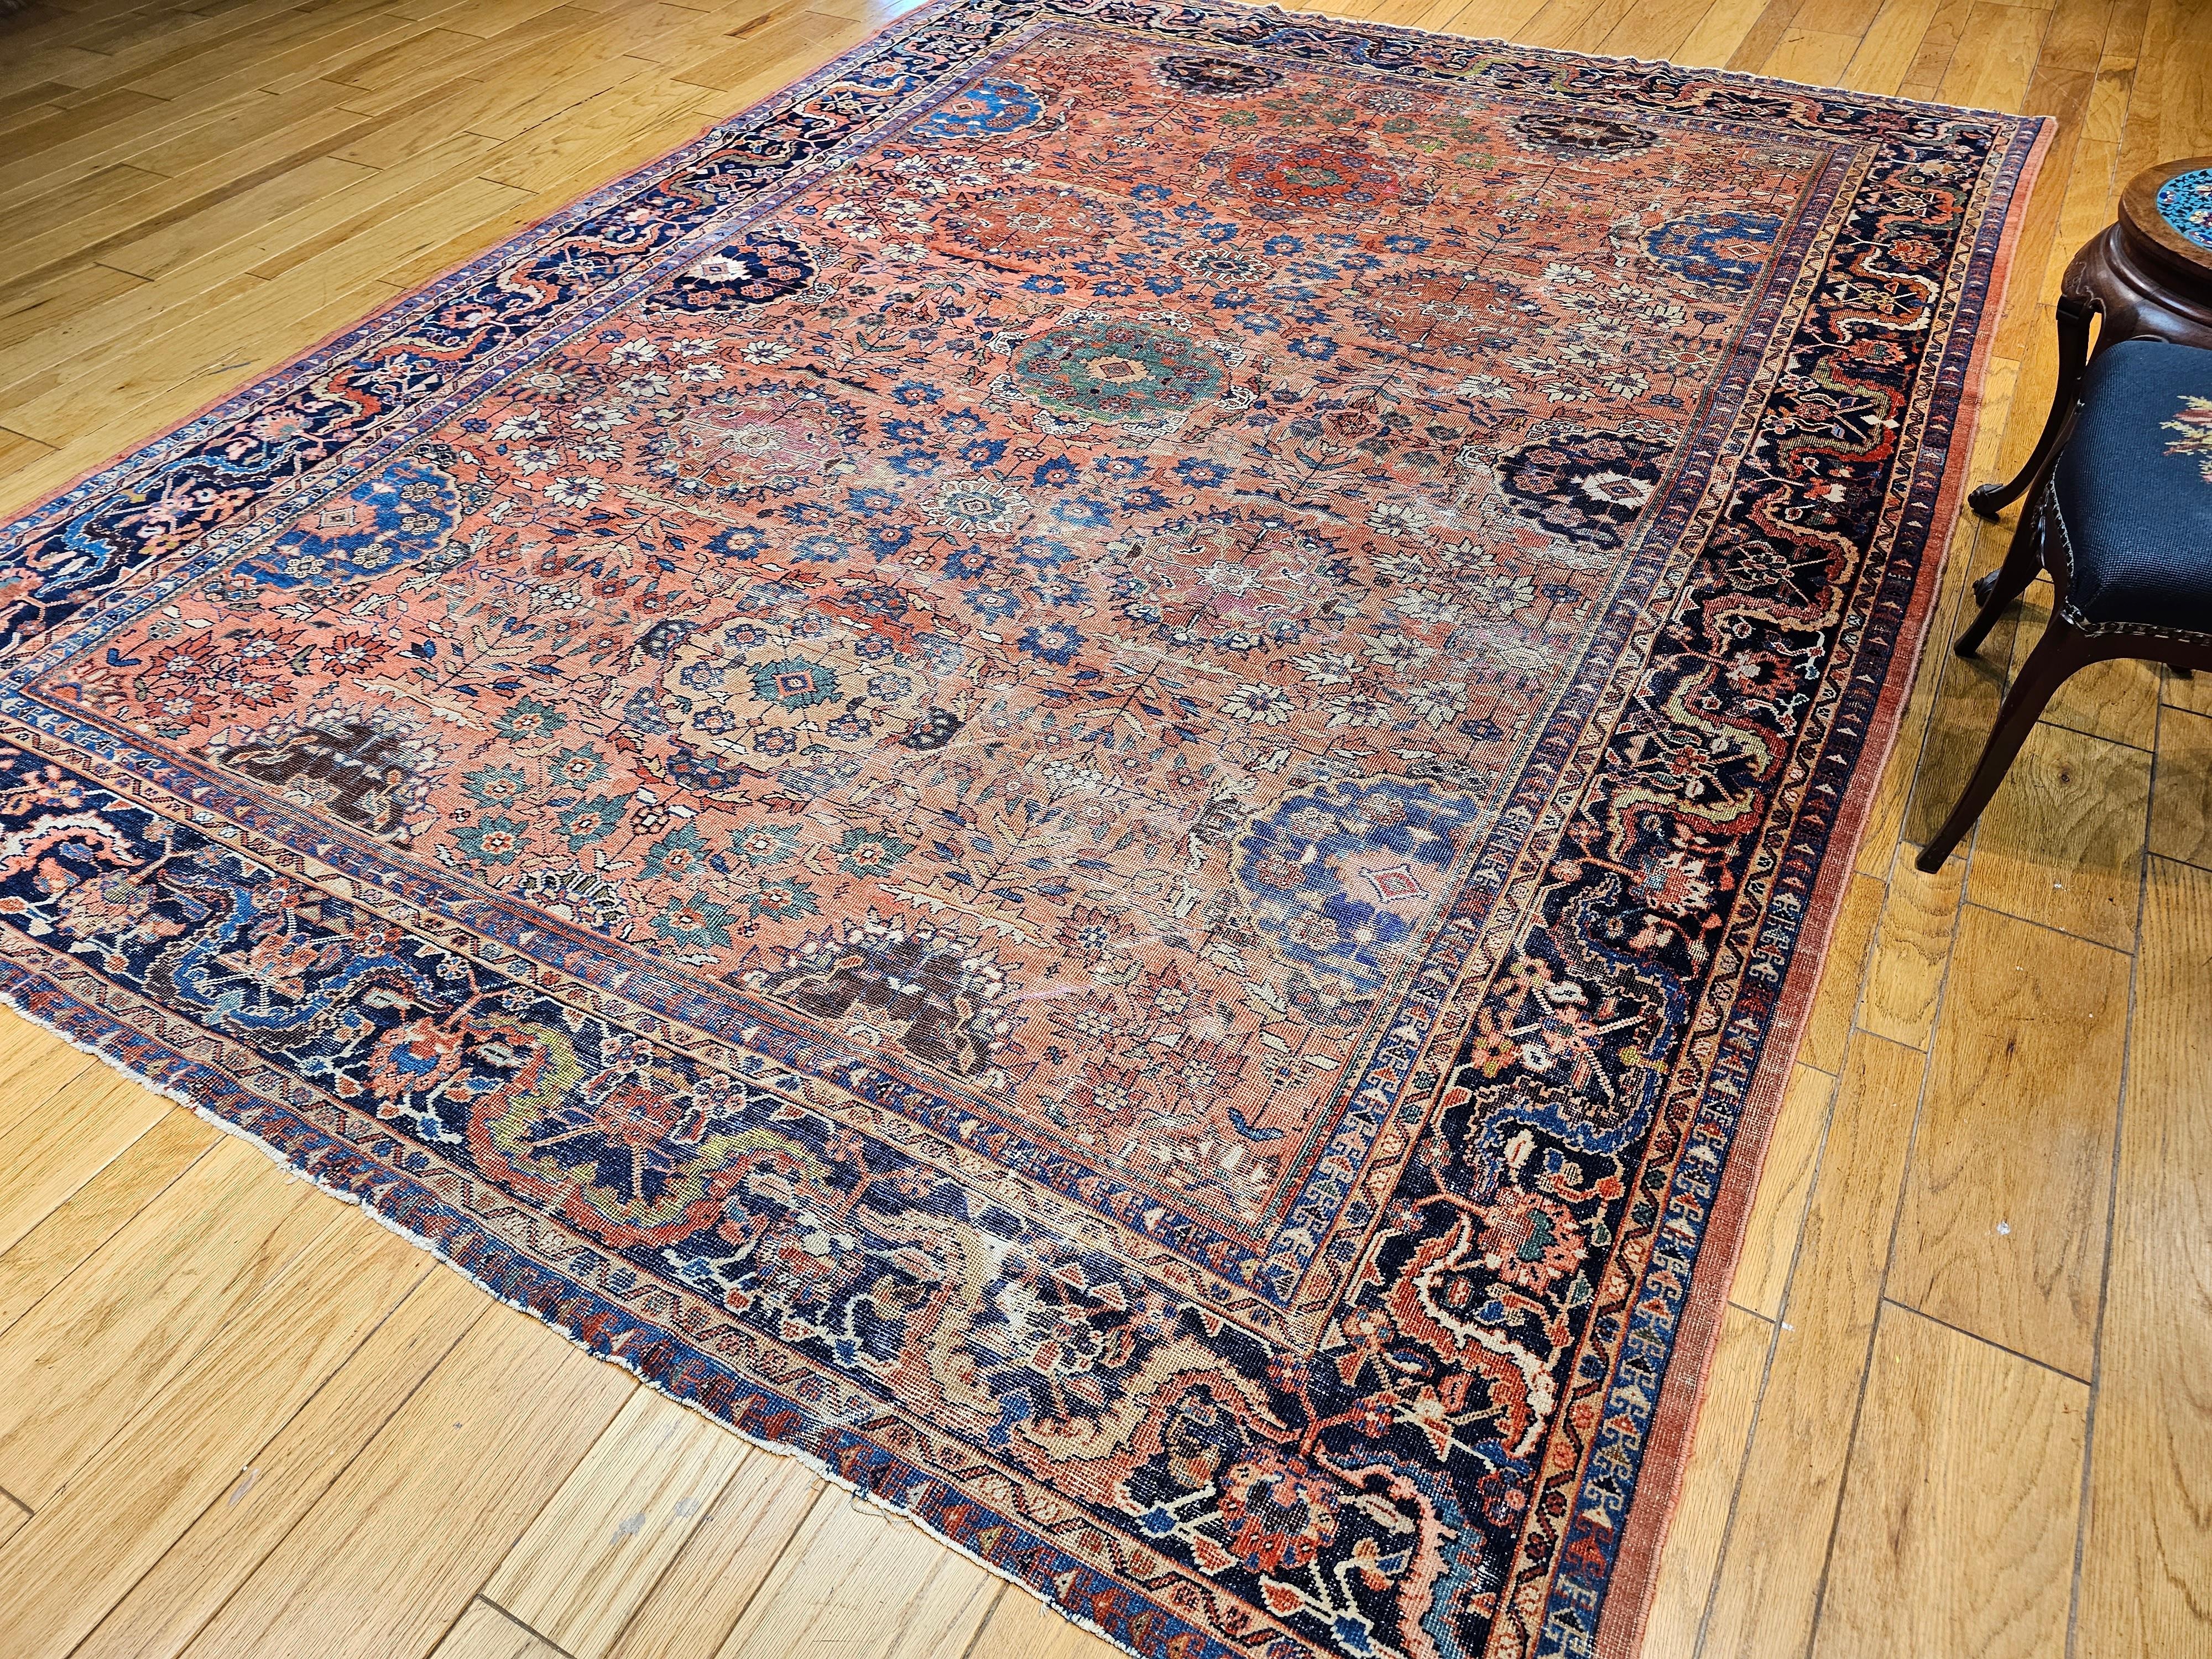 Vintage Persian Mahal Sultanabad Room Size Rug in Brick Red, Navy Blue 6